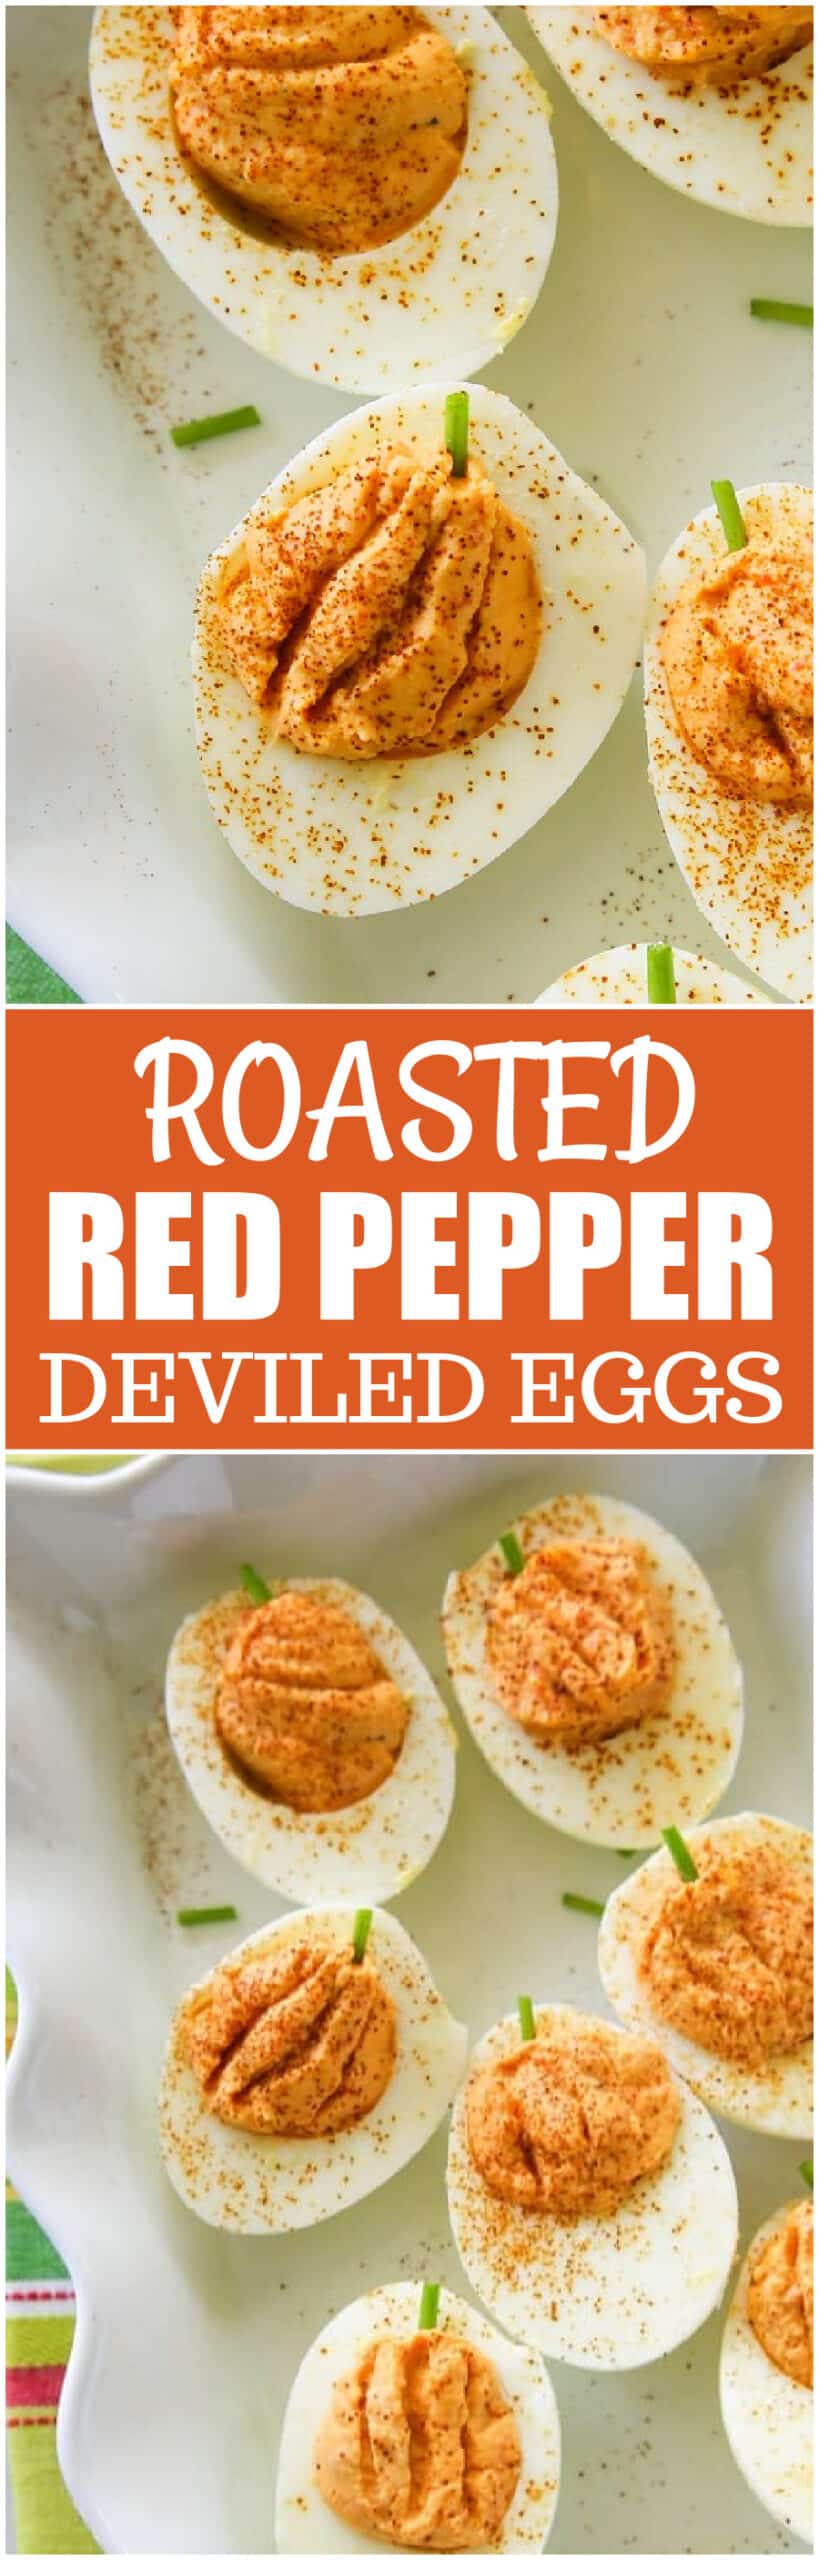 Roasted Red Pepper, Chive, and Chèvre Egg Bites Recipe